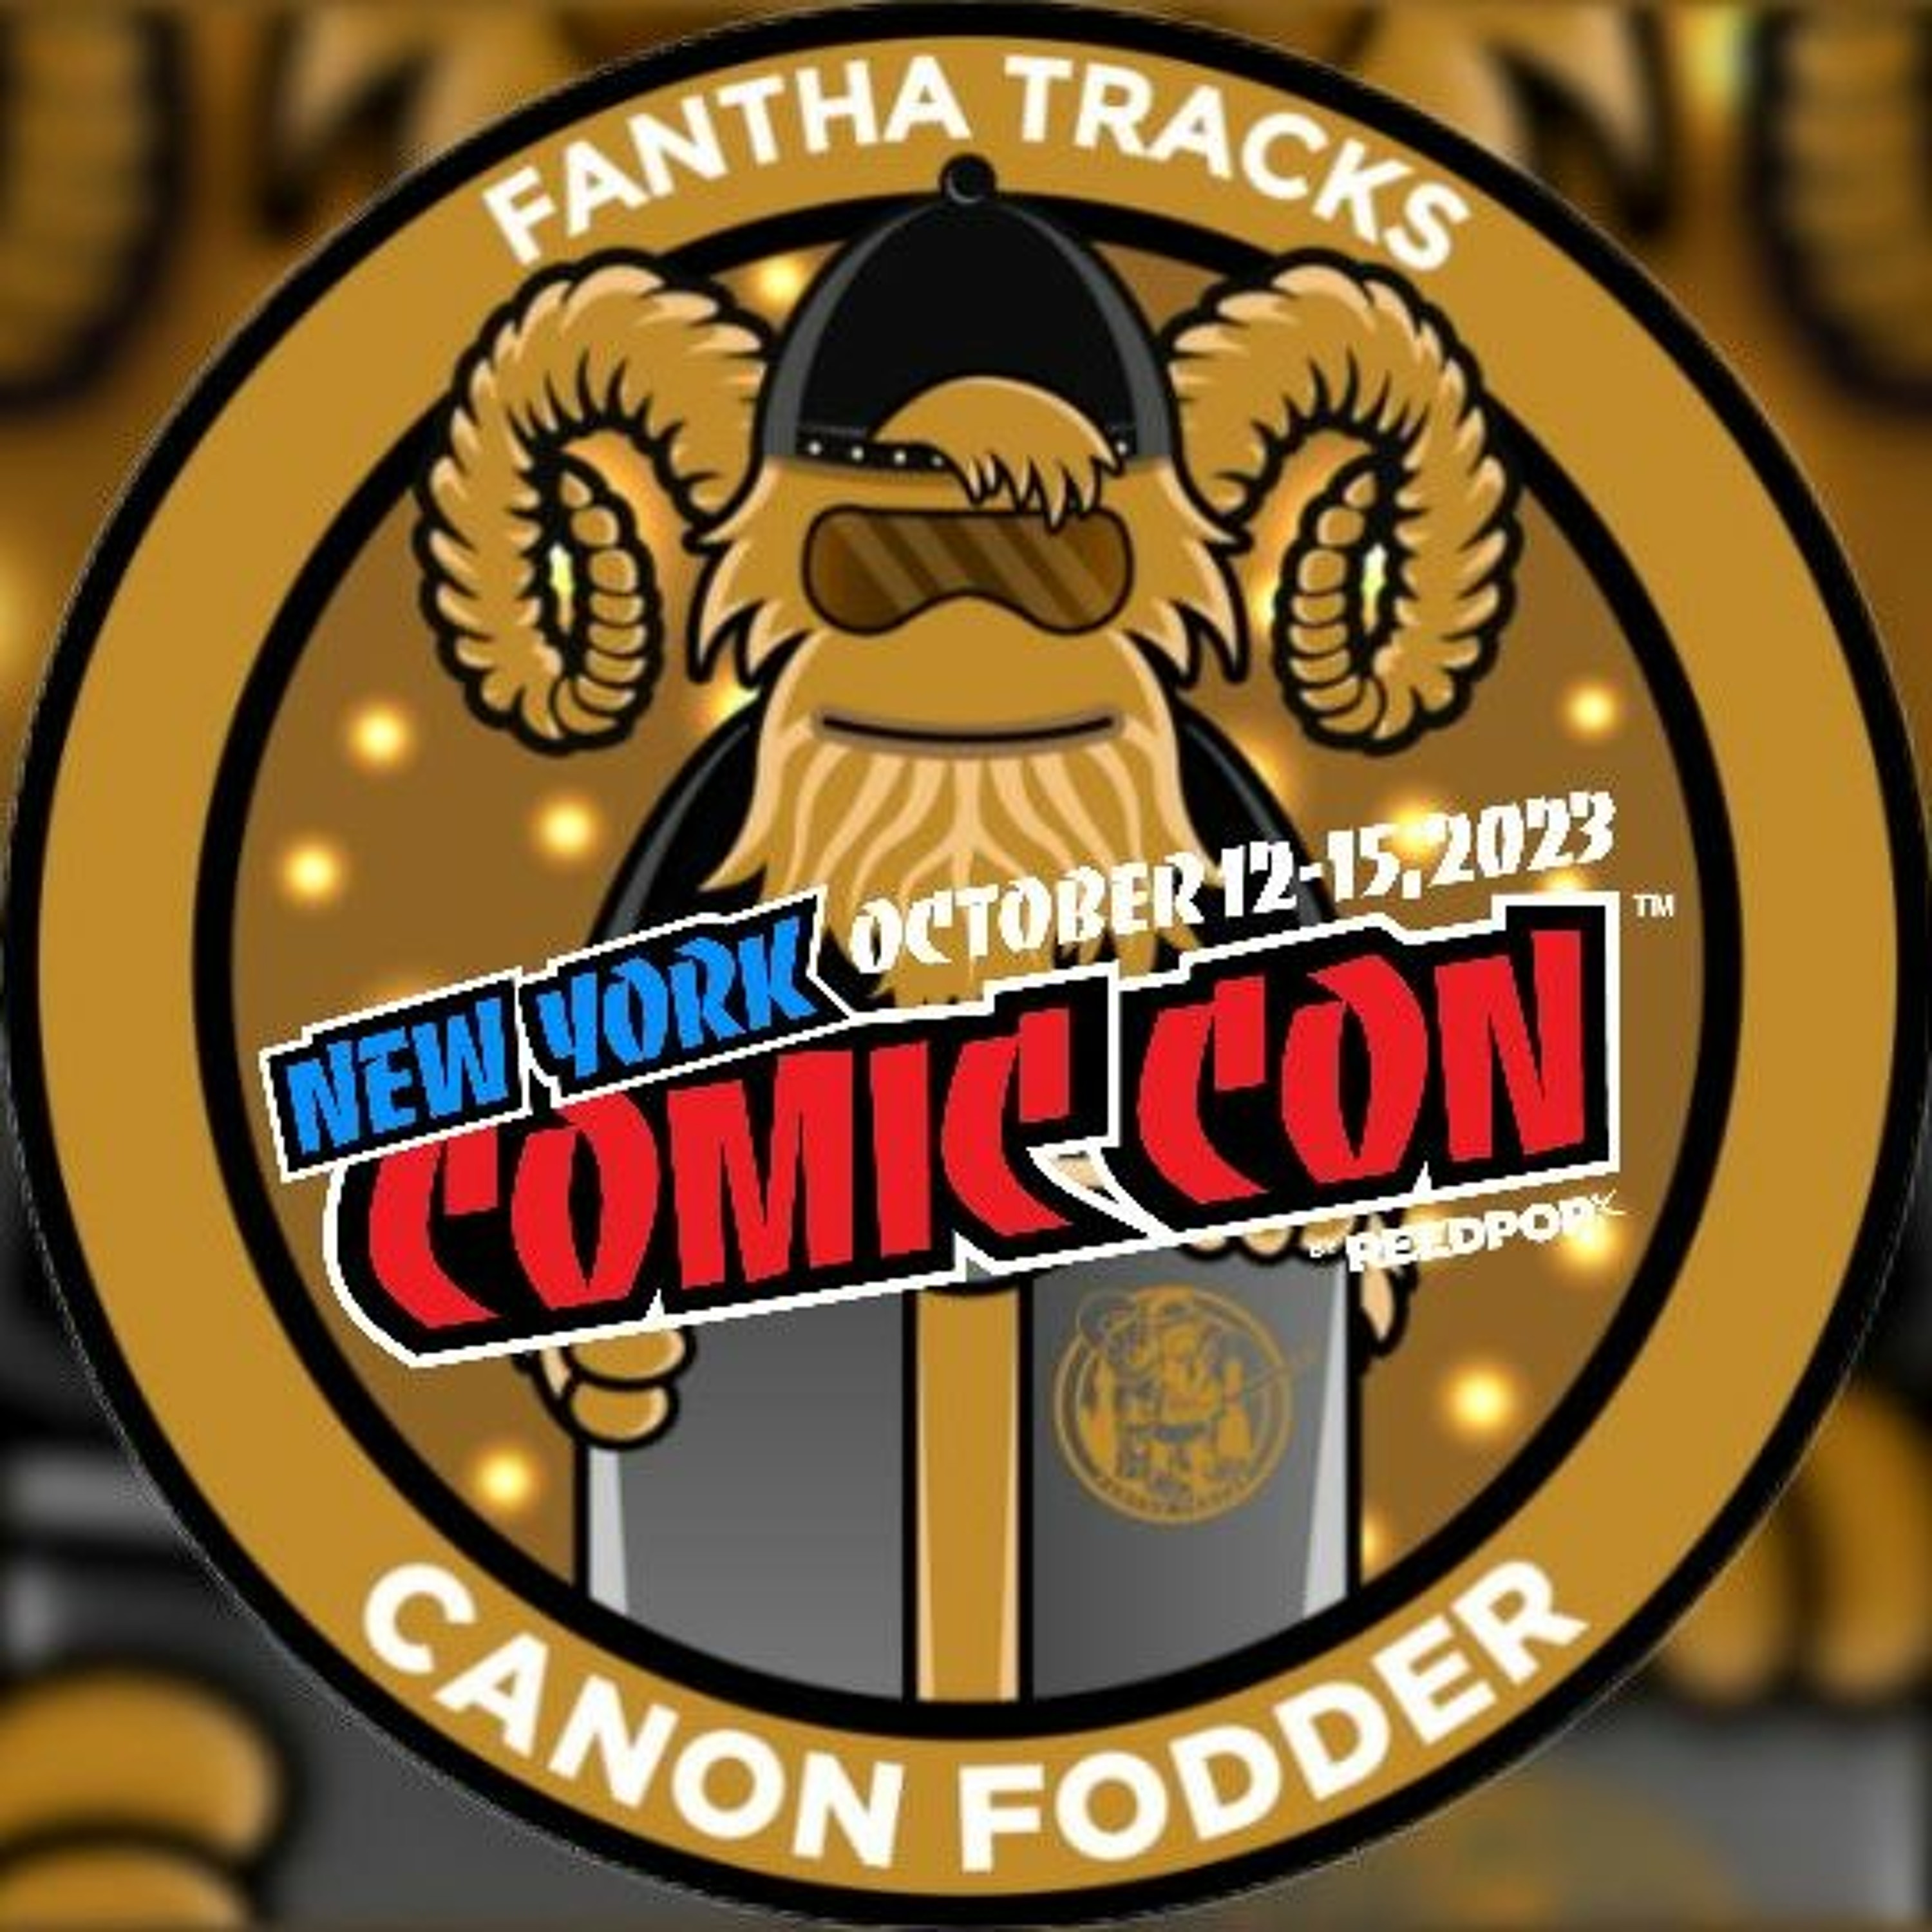 Canon Fodder at New York Comic Con 2023: From A Certain Point of View: Return of the Jedi